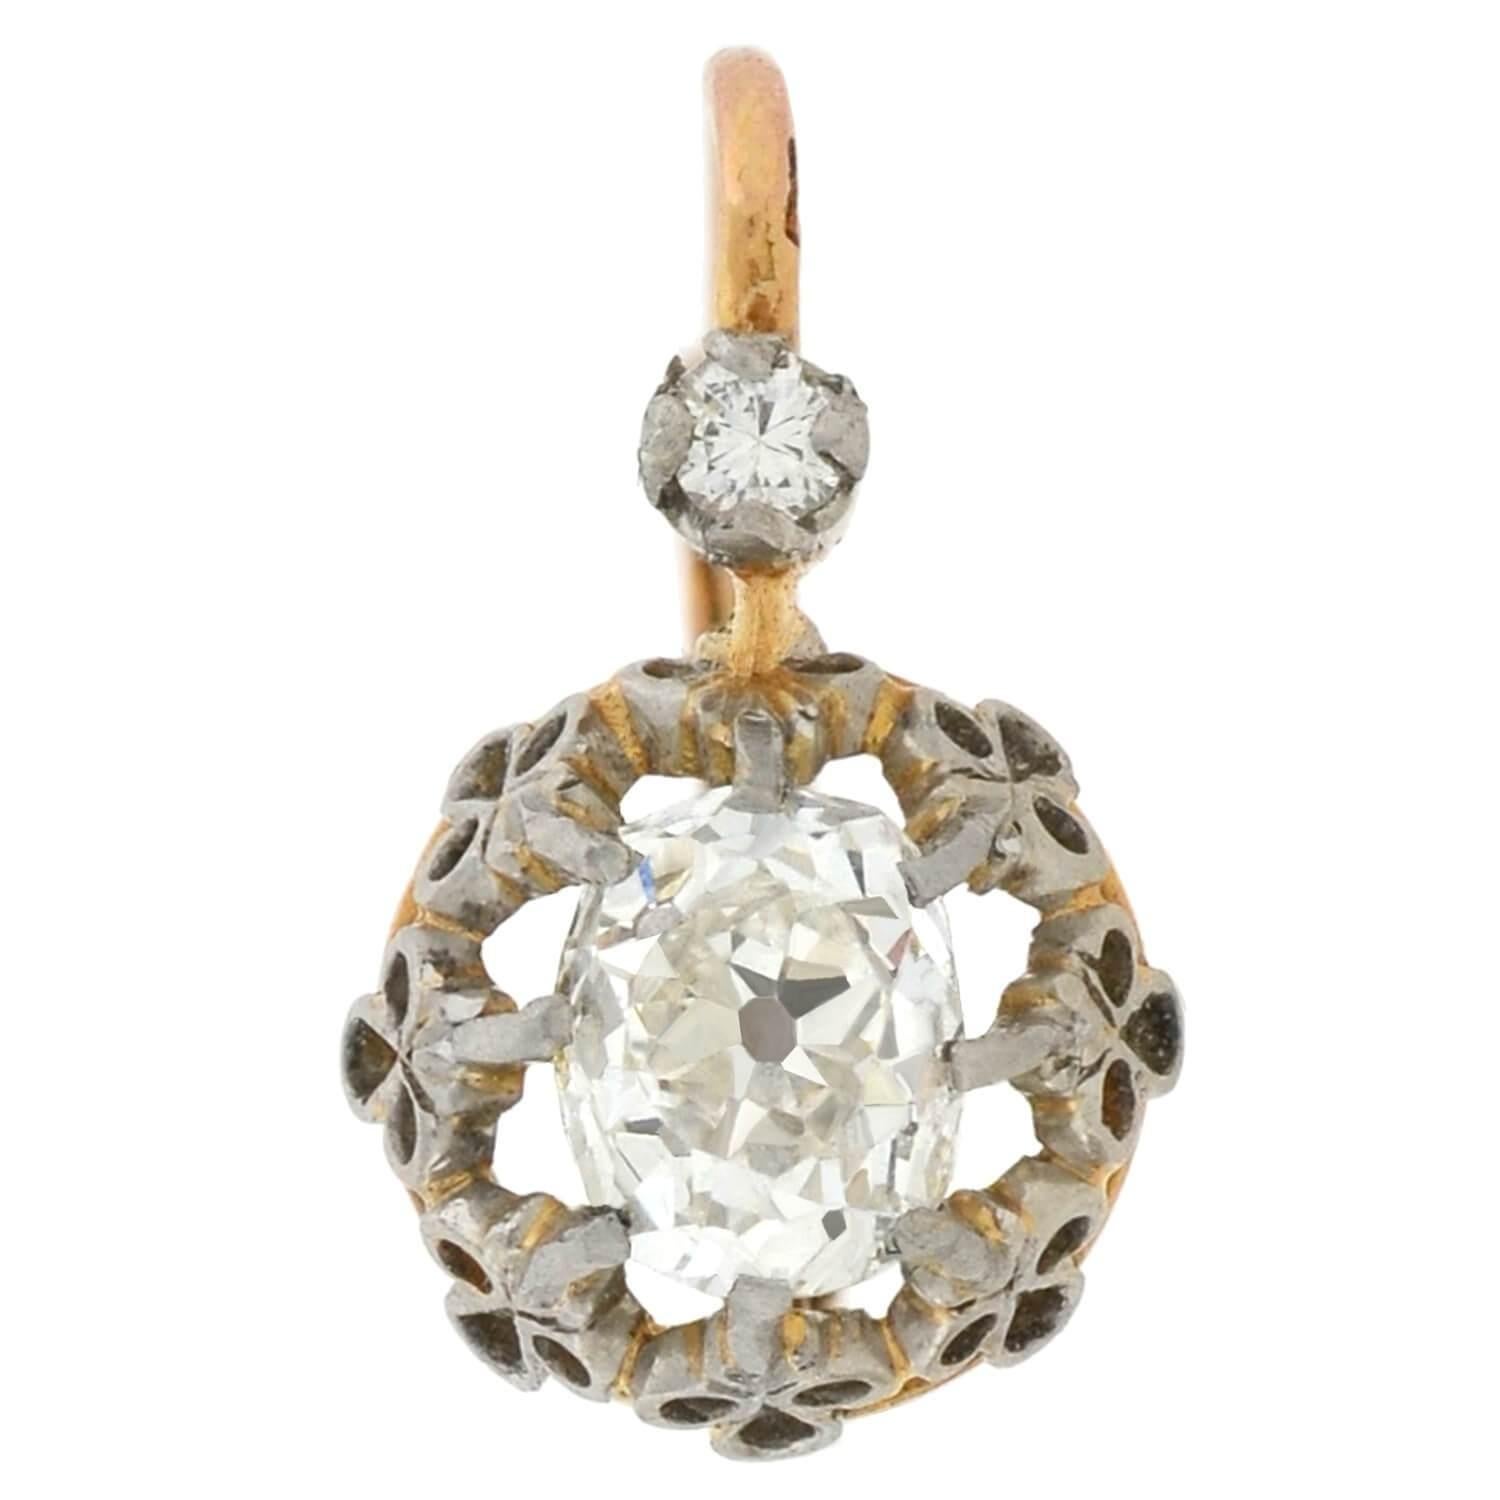 An exquisite pair of mixed metals diamond earrings from the Edwardian (ca1910) era! These lovely French-made earrings are crafted in 18kt yellow gold topped with platinum, and display a simple yet stunning design. The earrings hold a beautiful old